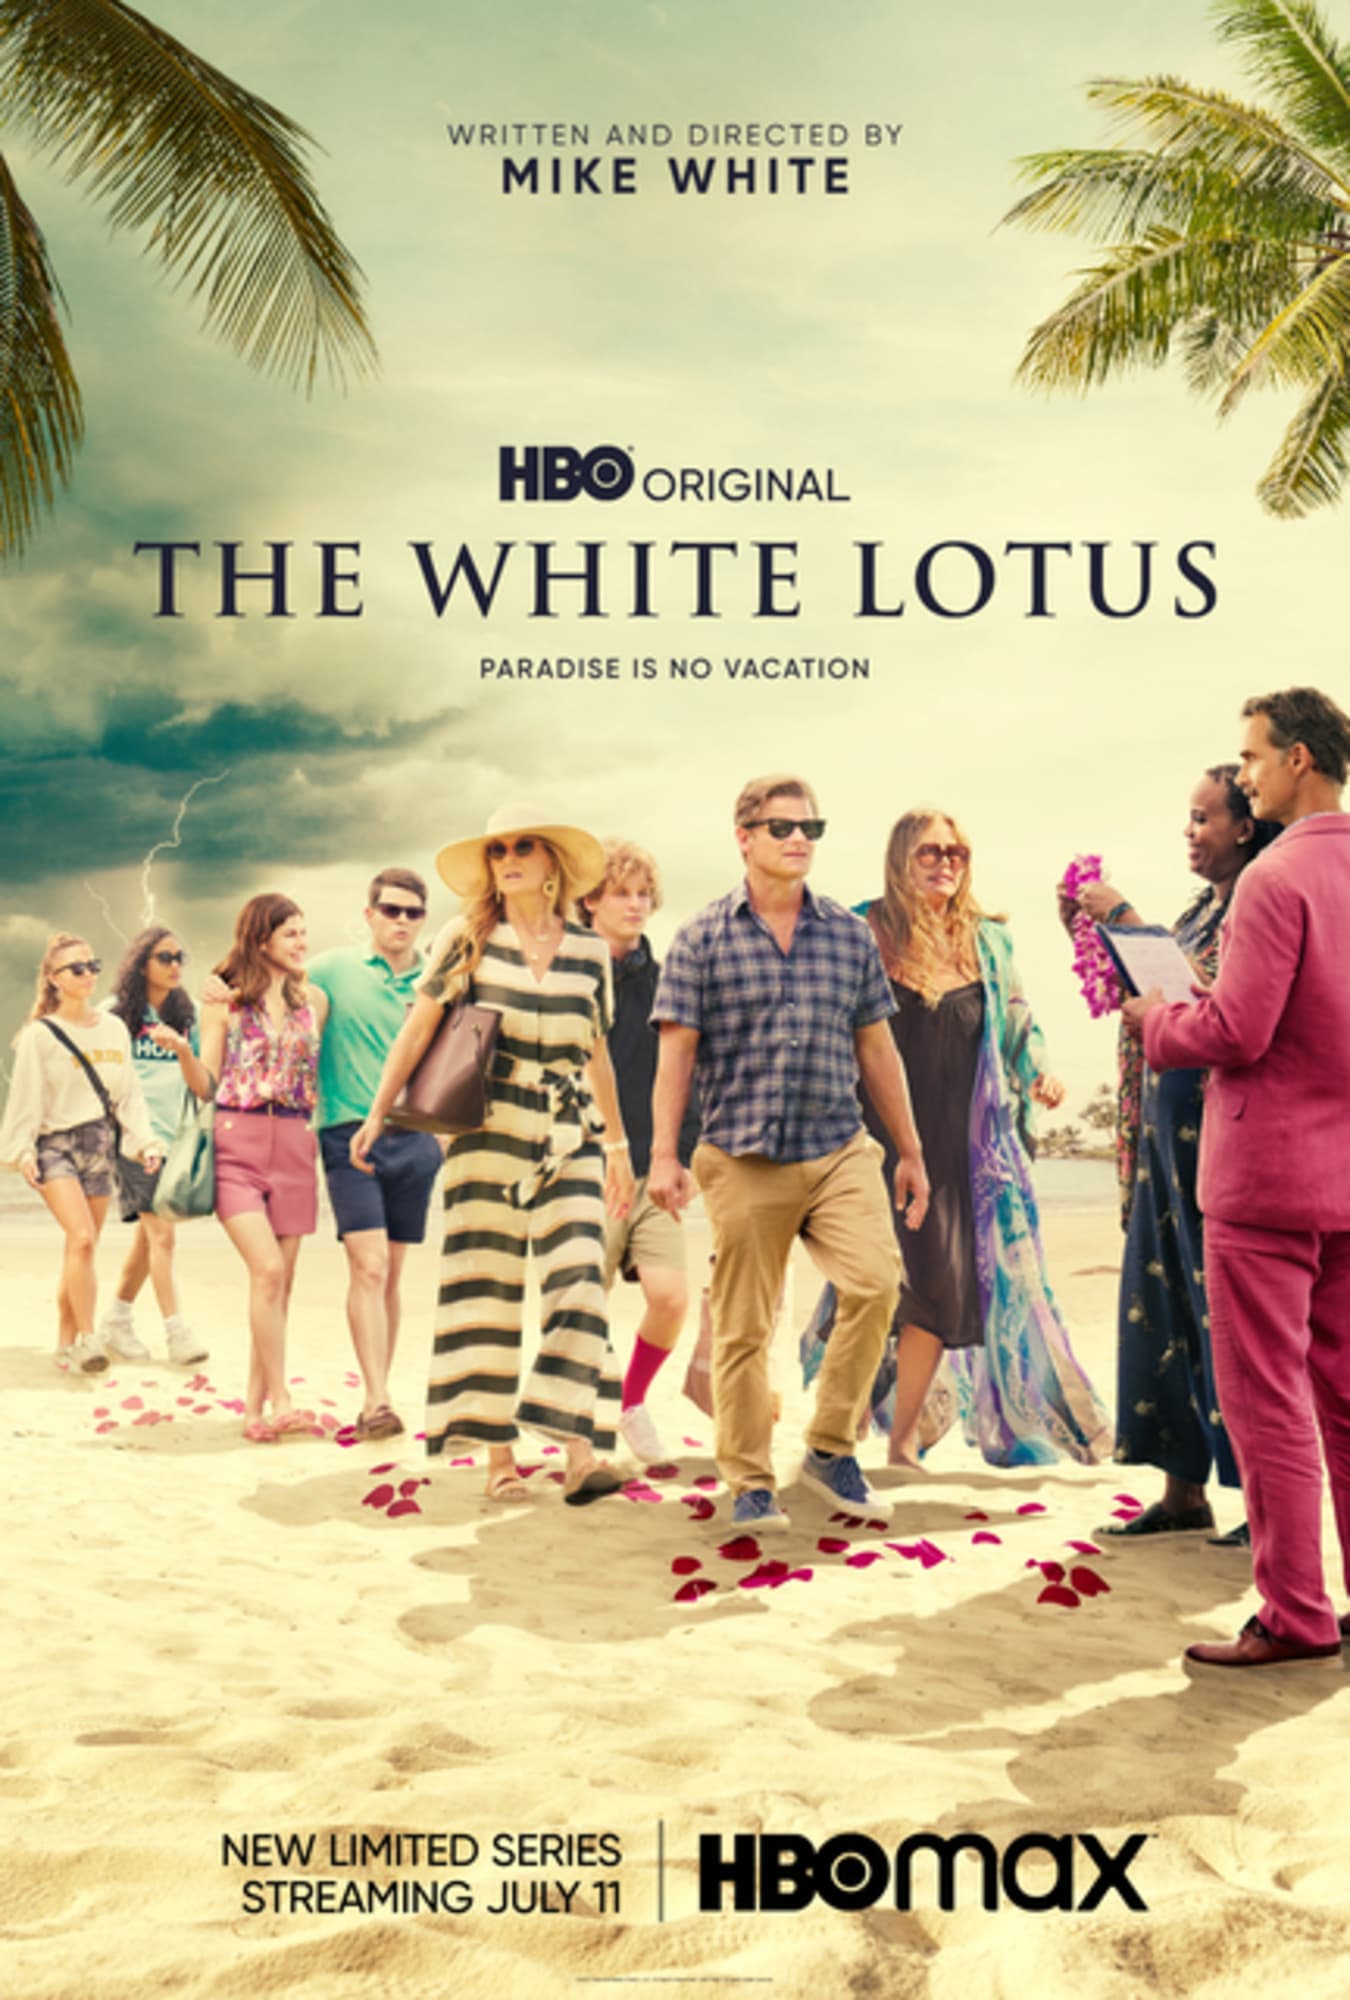 Trouble in paradise! The White Lotus cast – ranked by awfulness, Television